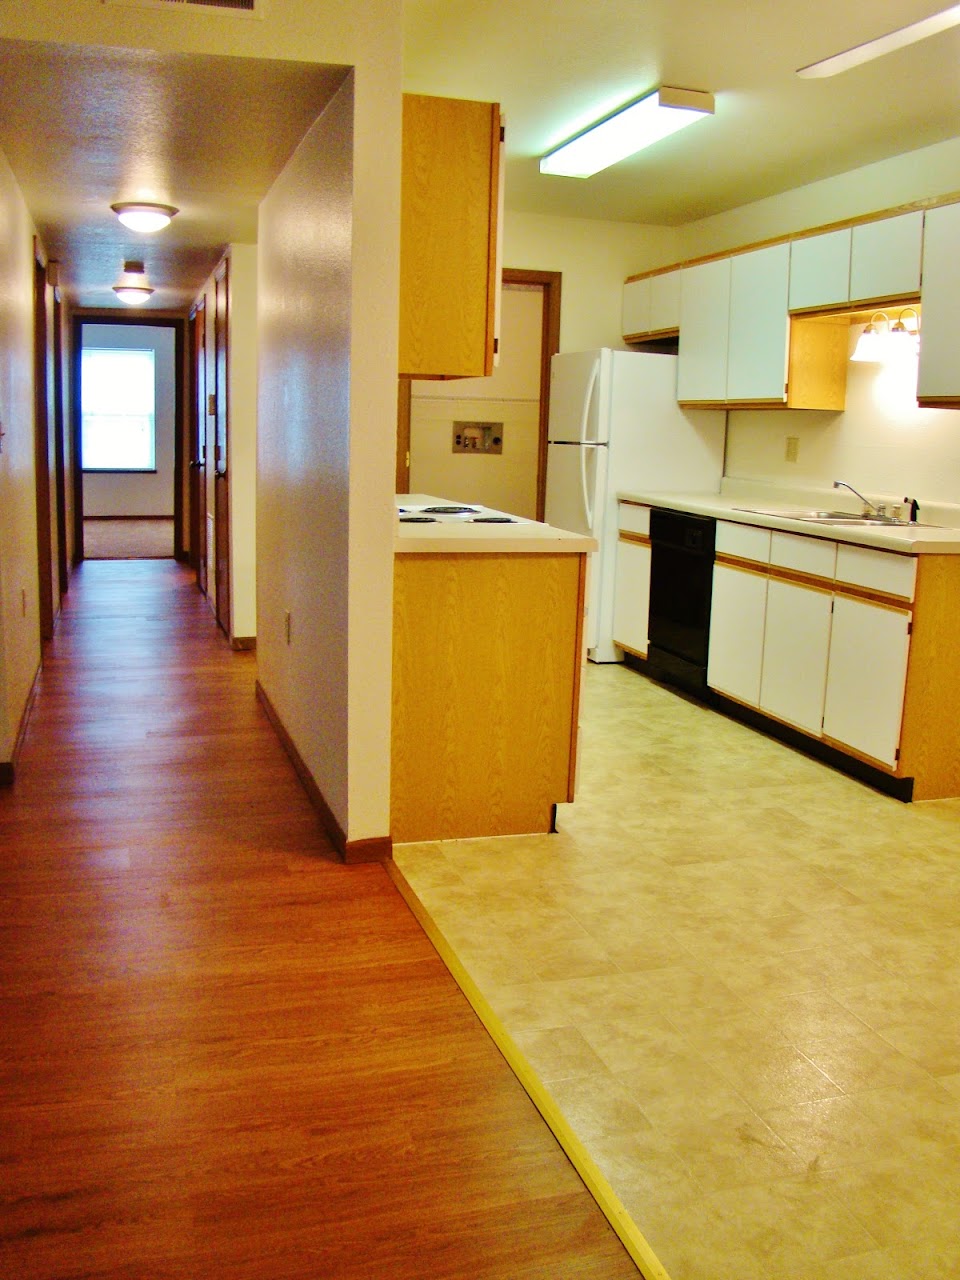 Photo of OAKWOOD ESTATES OF DECATUR. Affordable housing located at 1400 W MOUND RD DECATUR, IL 62526